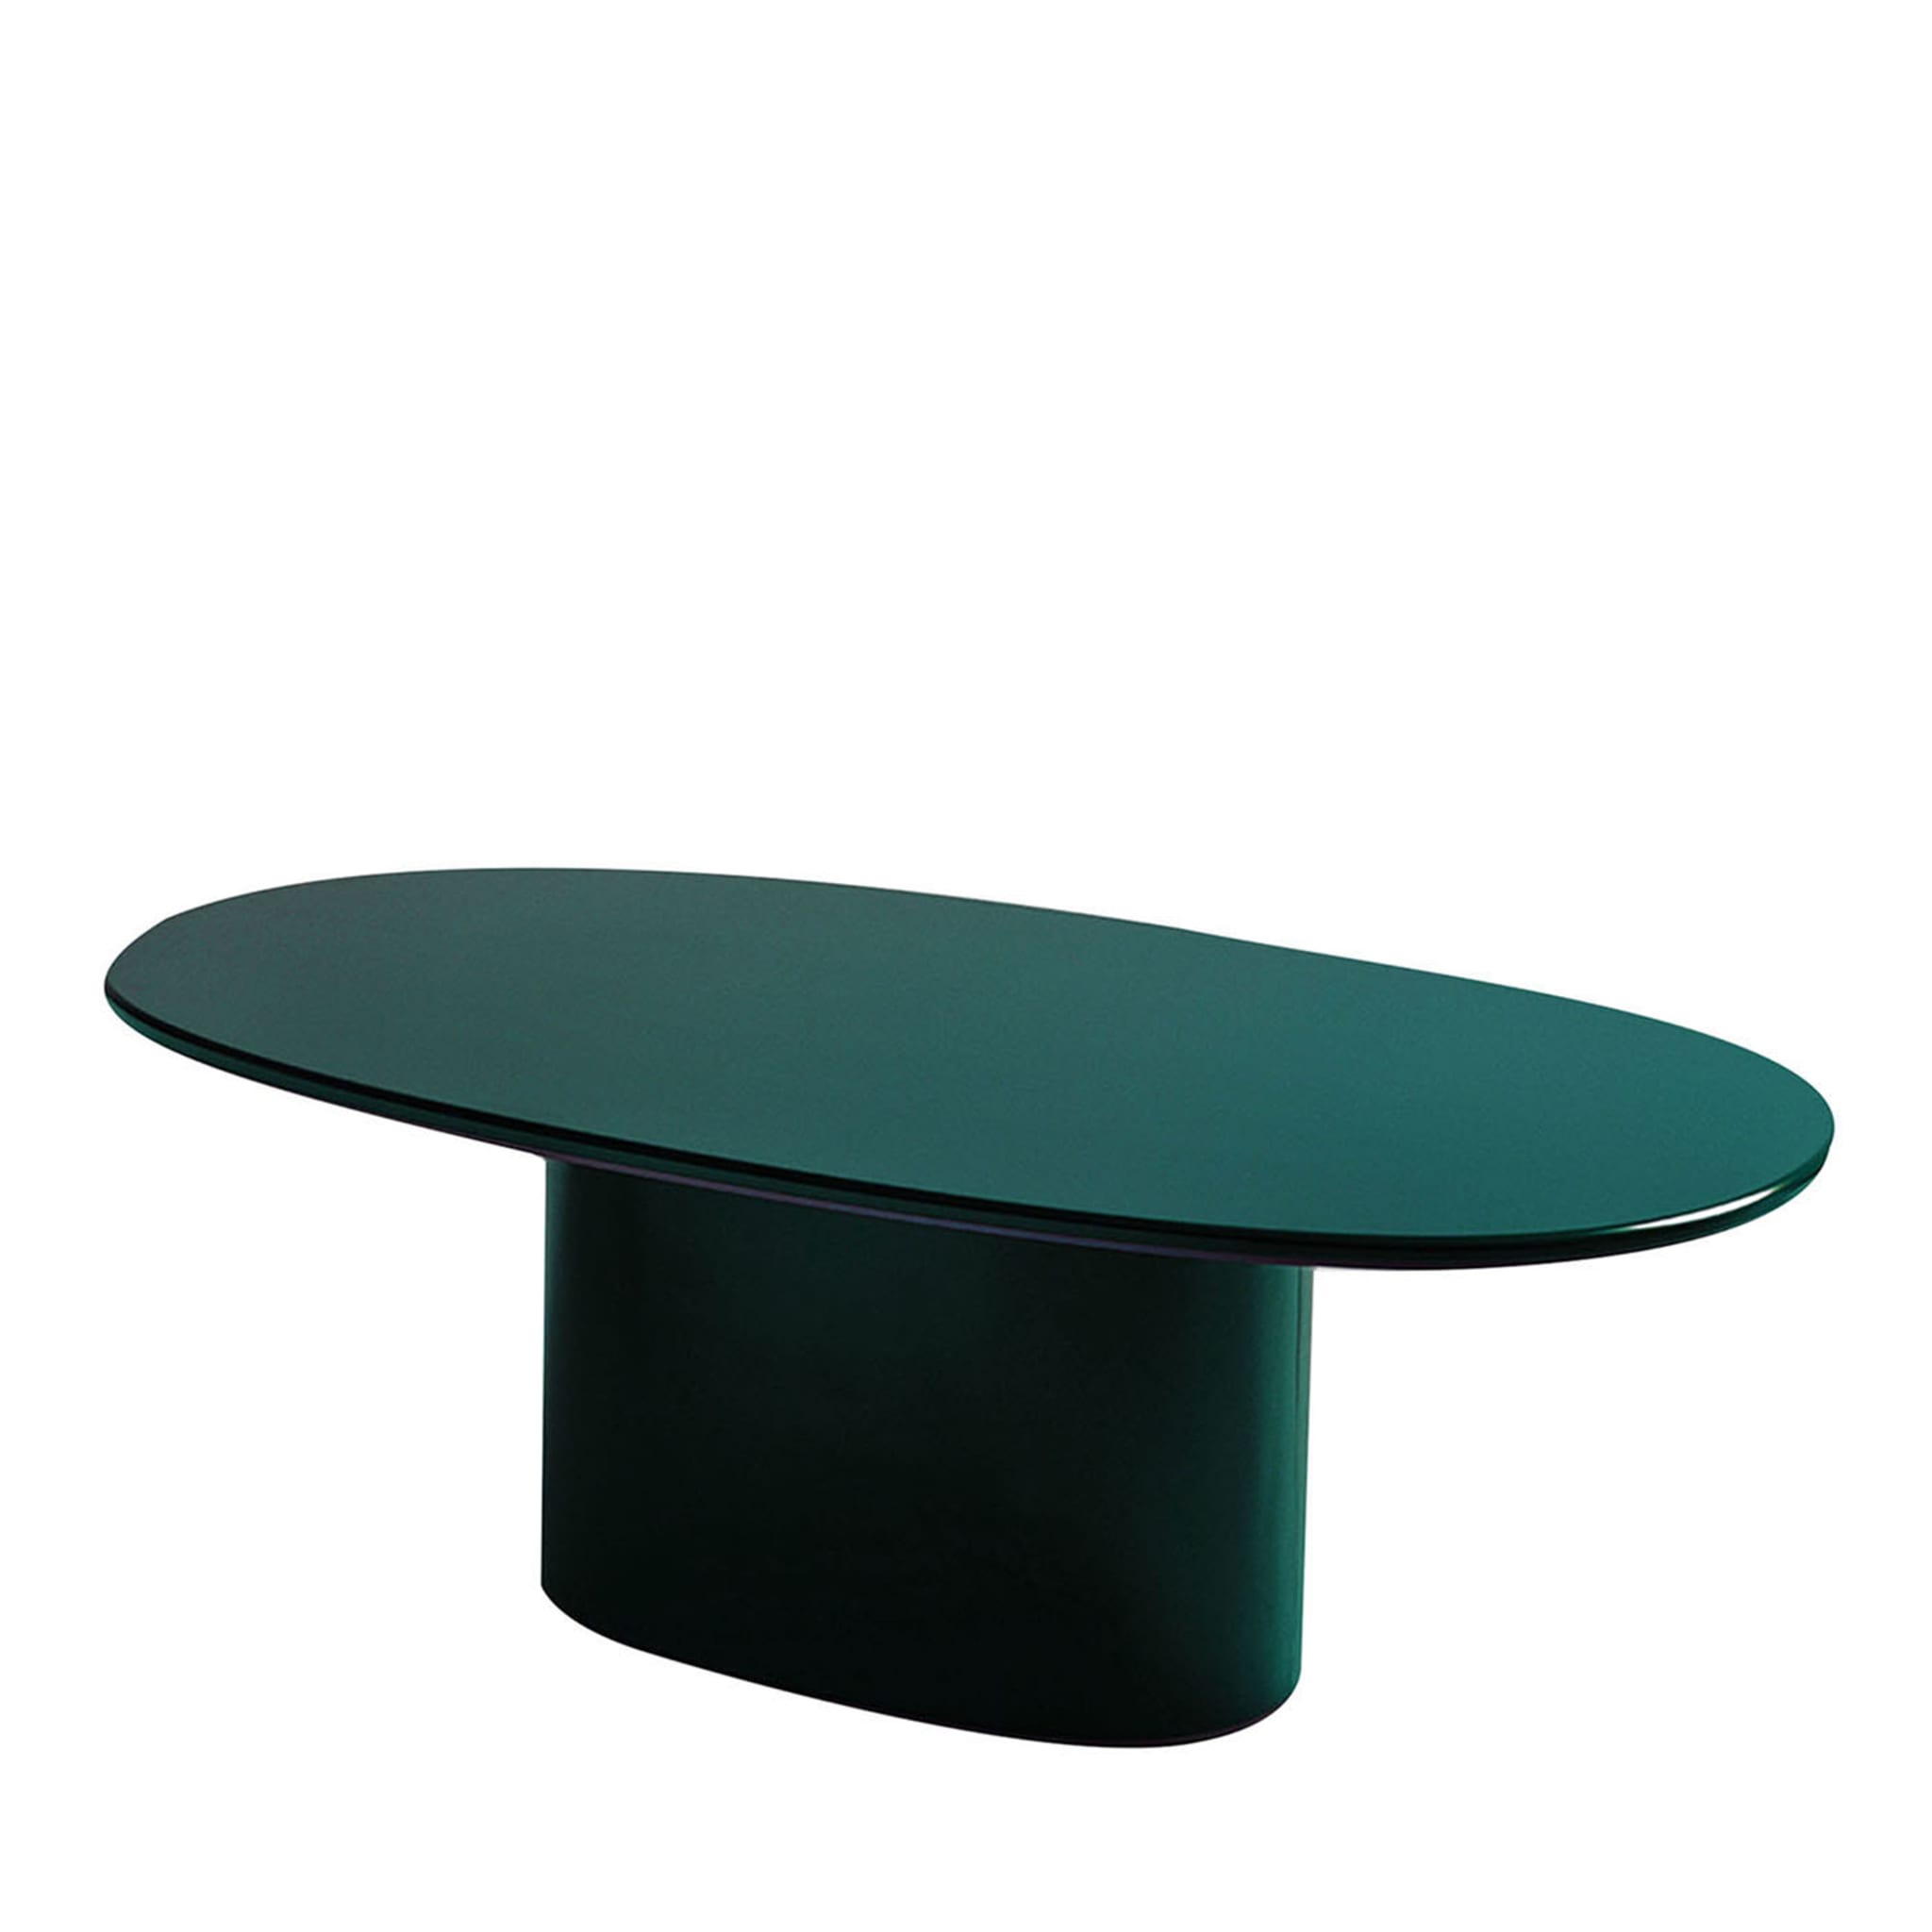 Oku Oval Emerald Dining Table by Federica Biasi - Main view